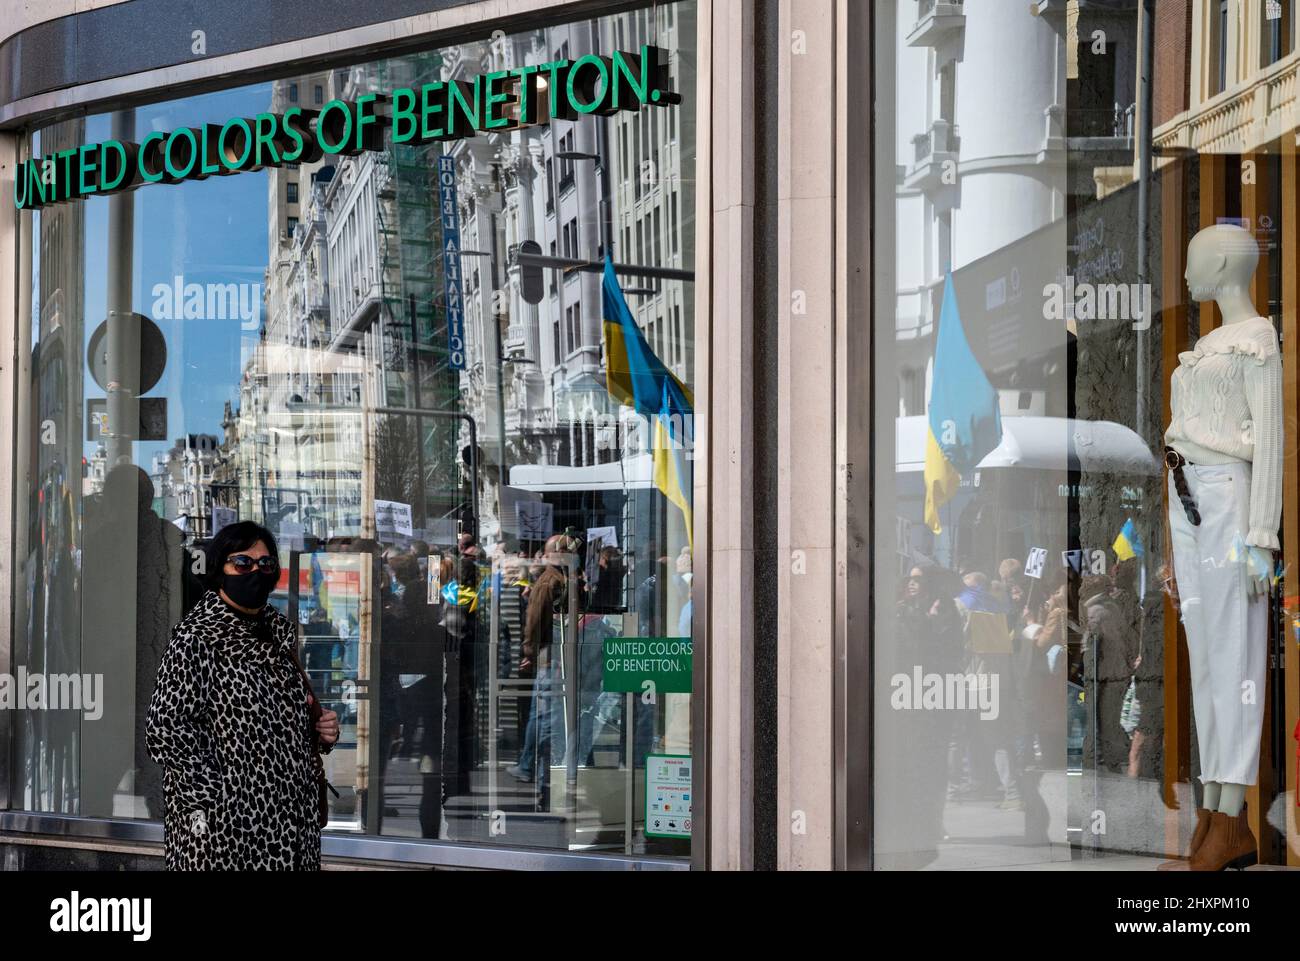 Italian fashion brand United Colors of Benetton store seen in Spain Stock  Photo - Alamy